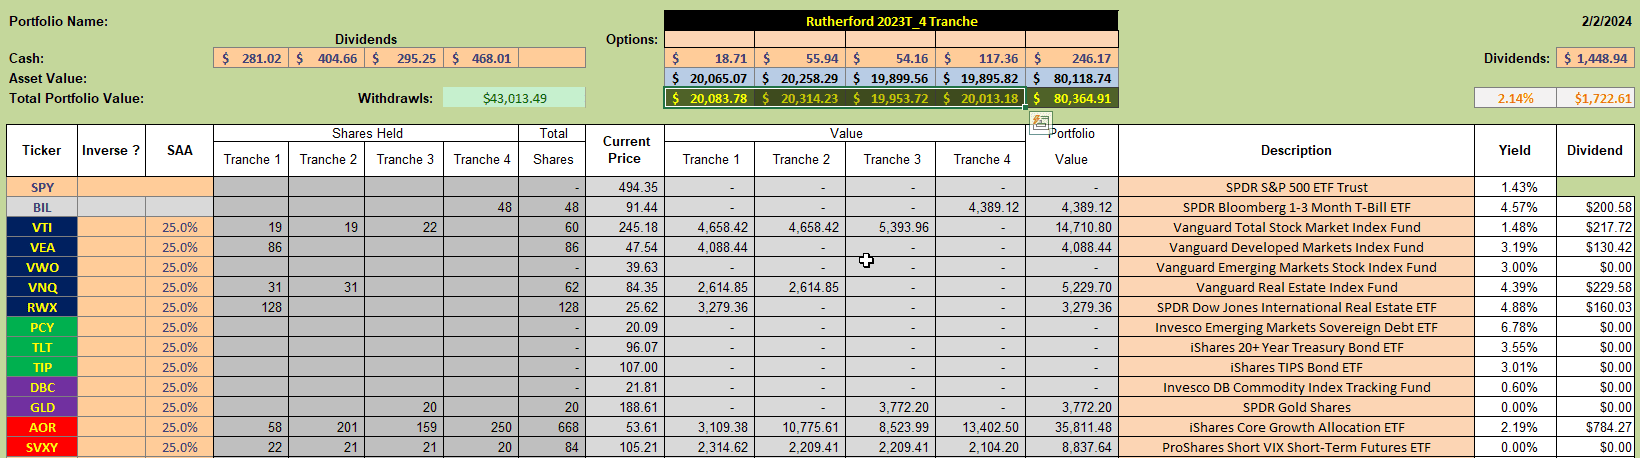 Rutherford Portfolio Review (Tranche 4): 2 February 2024 5